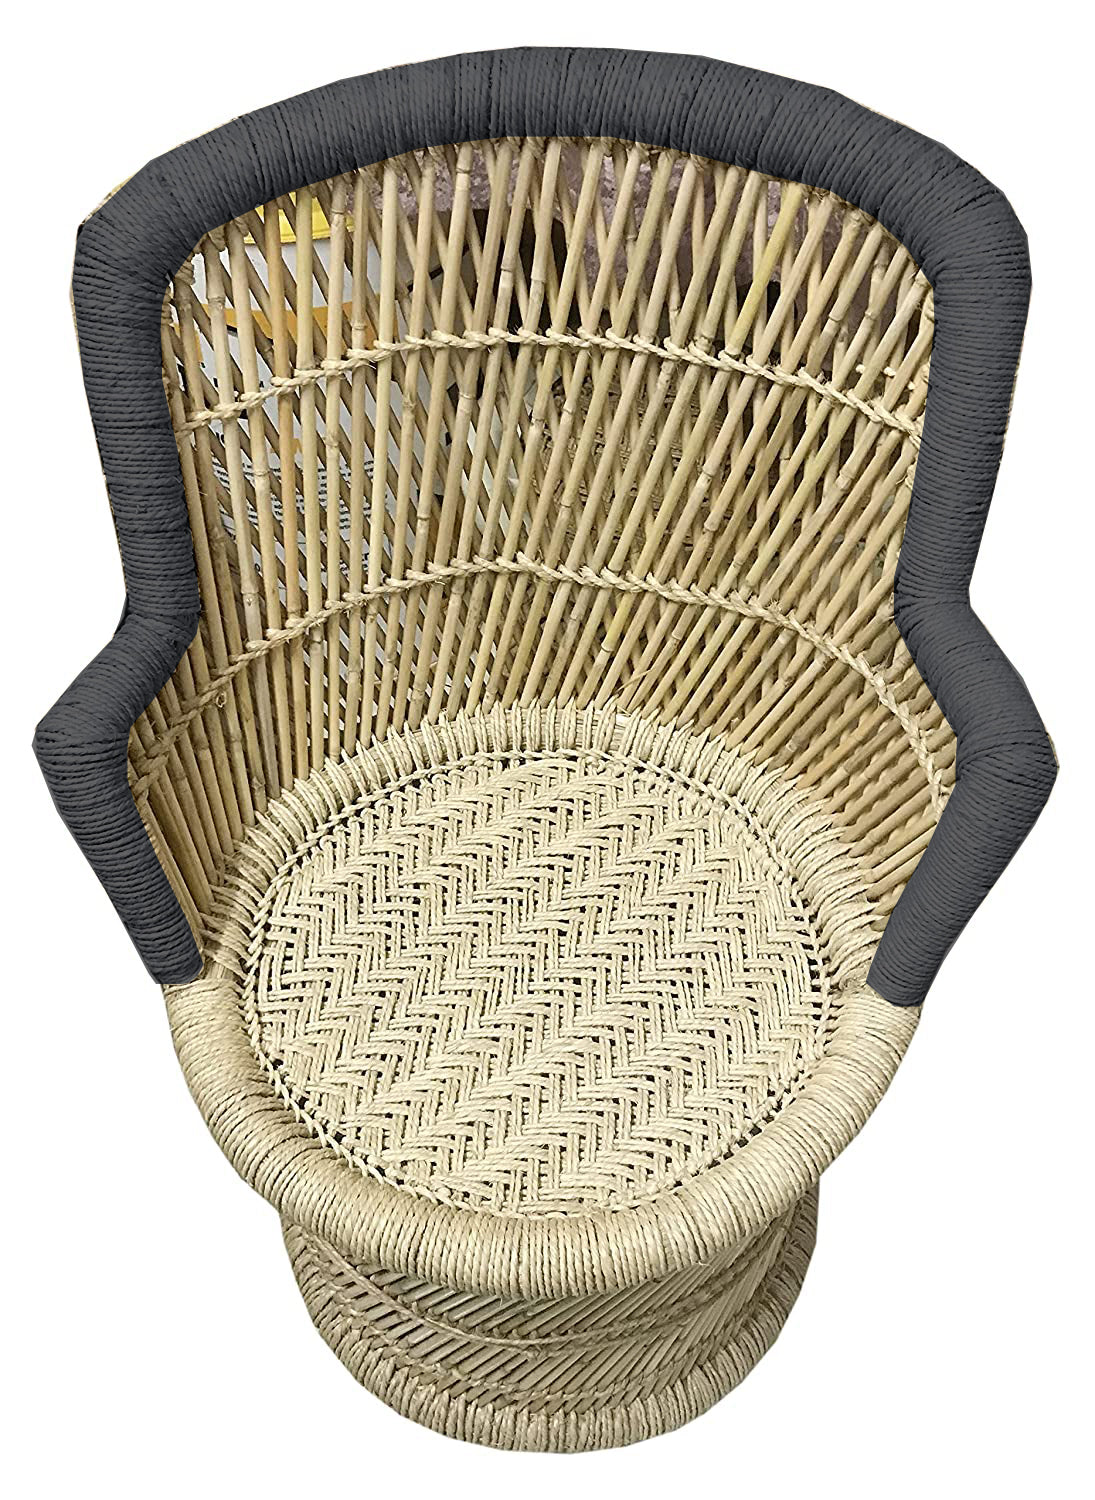 Handmakers Bamboo Mudda chair with Black color for Kids